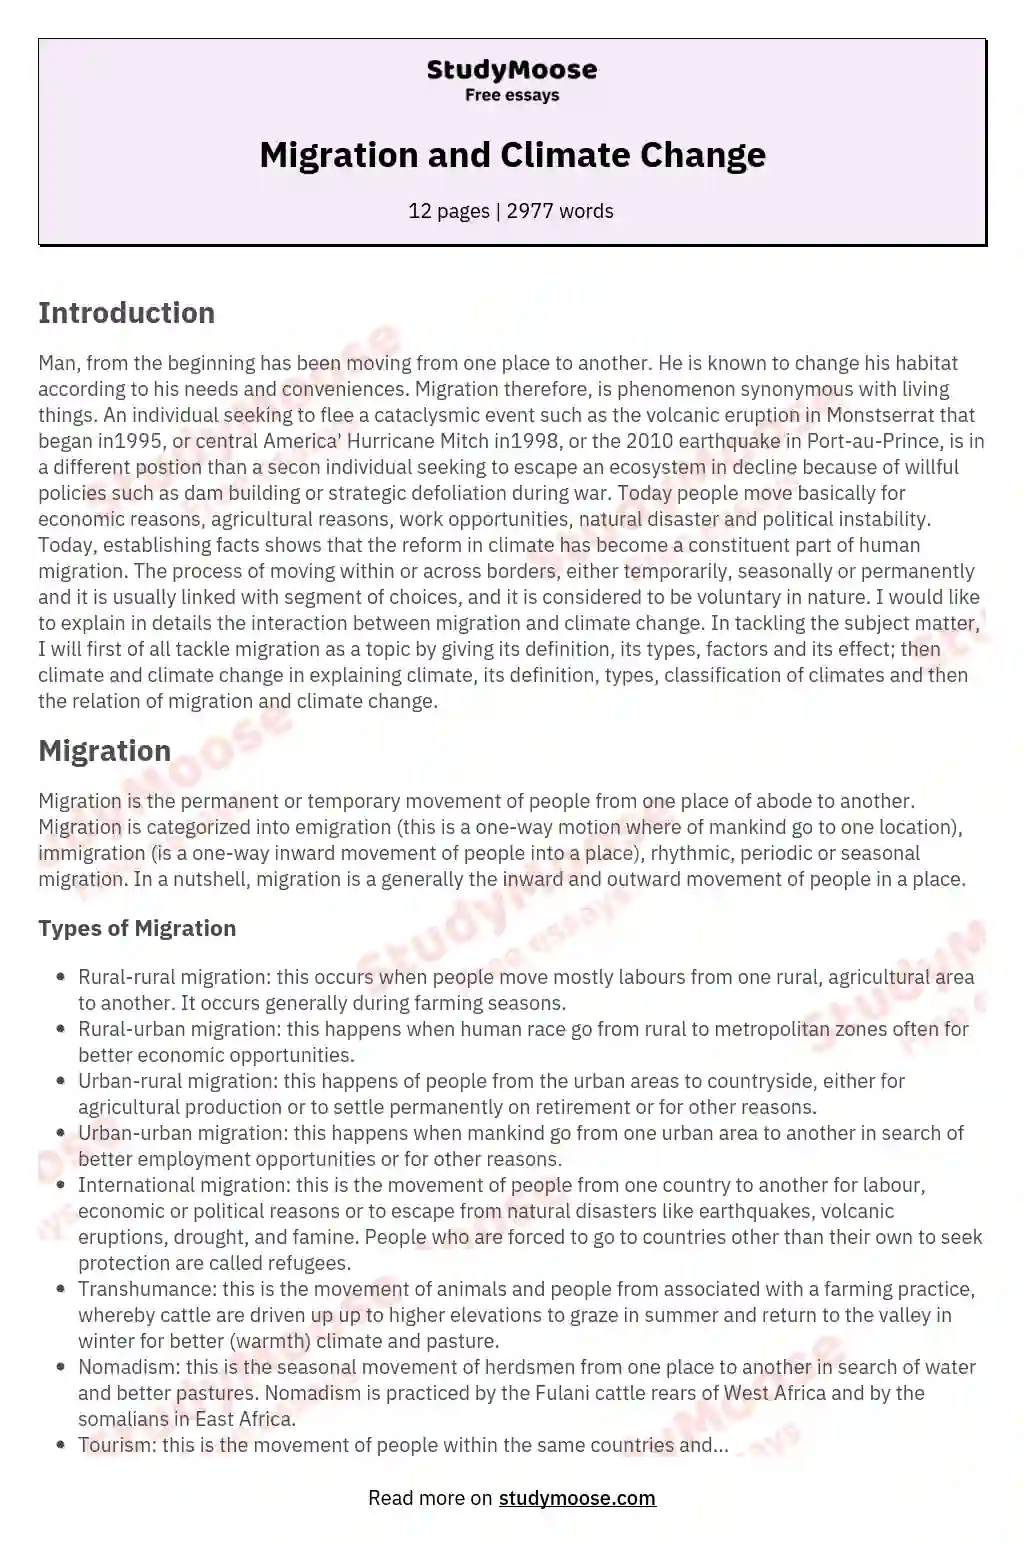 Migration and Climate Change essay